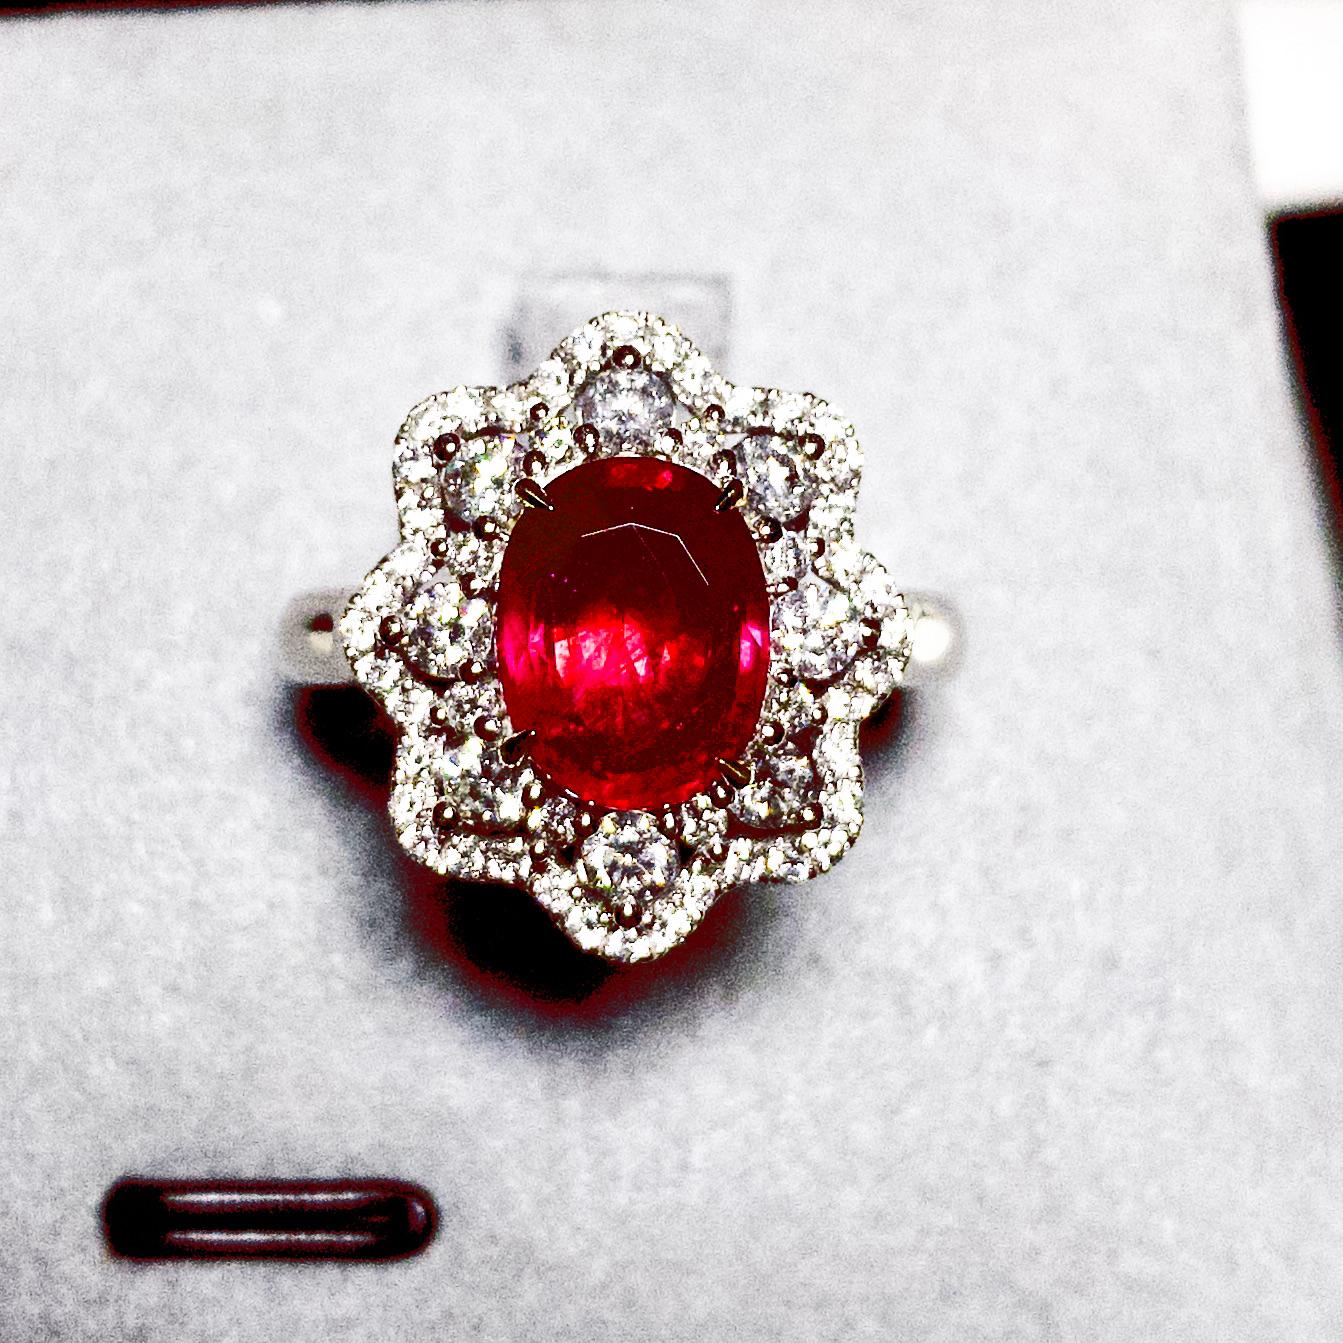 A Classical Ruby Cluster Ring in 18K White Gold. The Ruby is first surrounded by 8 larger round brilliant cut diamonds, followed by multi smaller Diamond pave. The larger Diamonds are giving off strong fire and brilliance while the smaller ones make